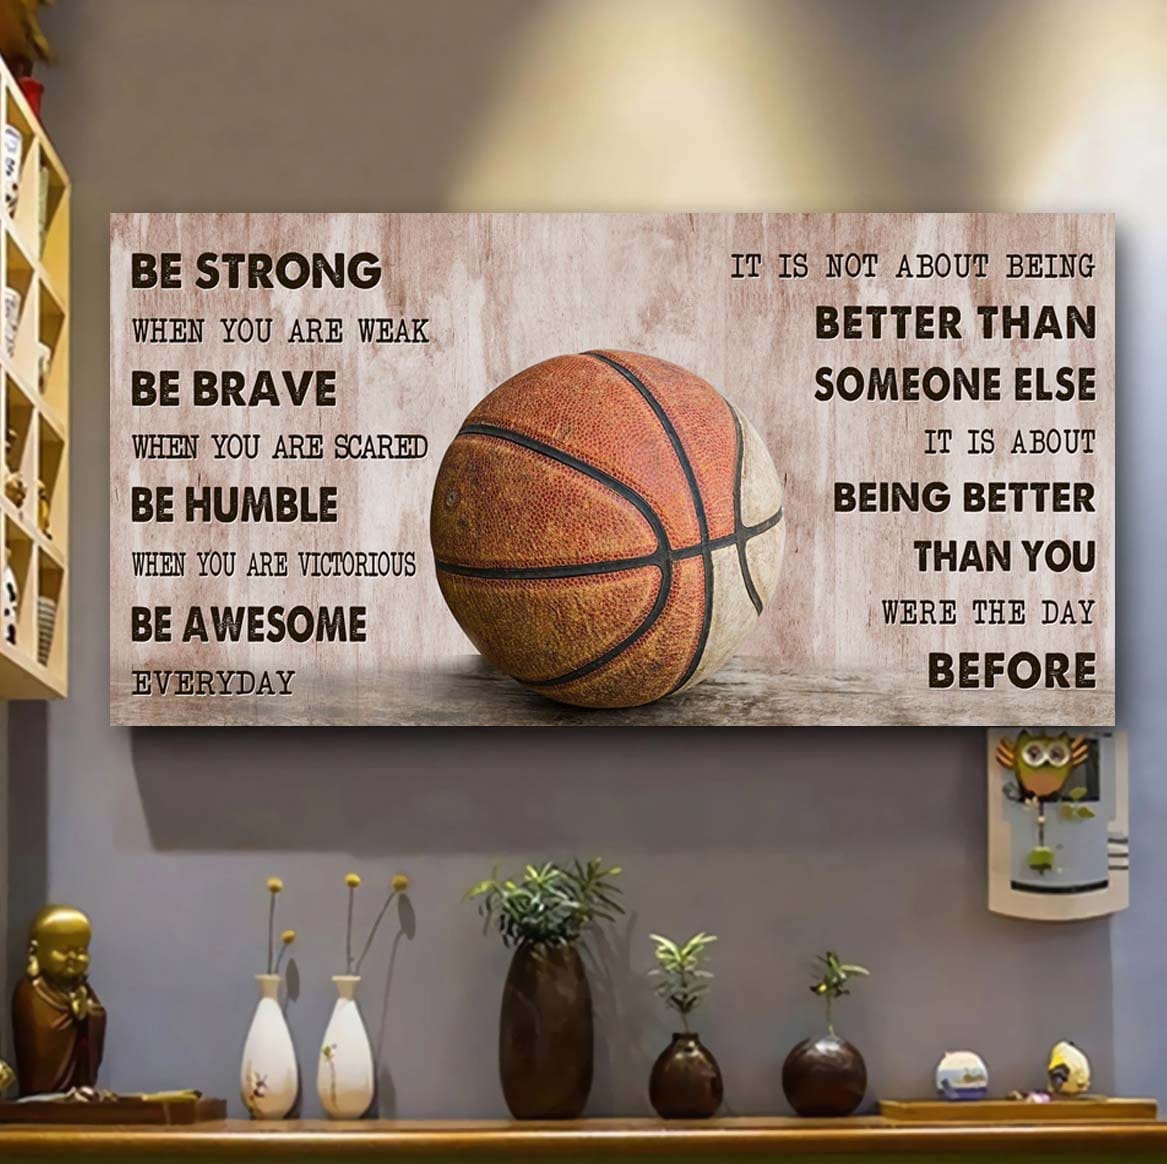 Be Awesome Basketball Canvas It Is Not About Being Better Than Someone Else - Be Strong When You Are Weak